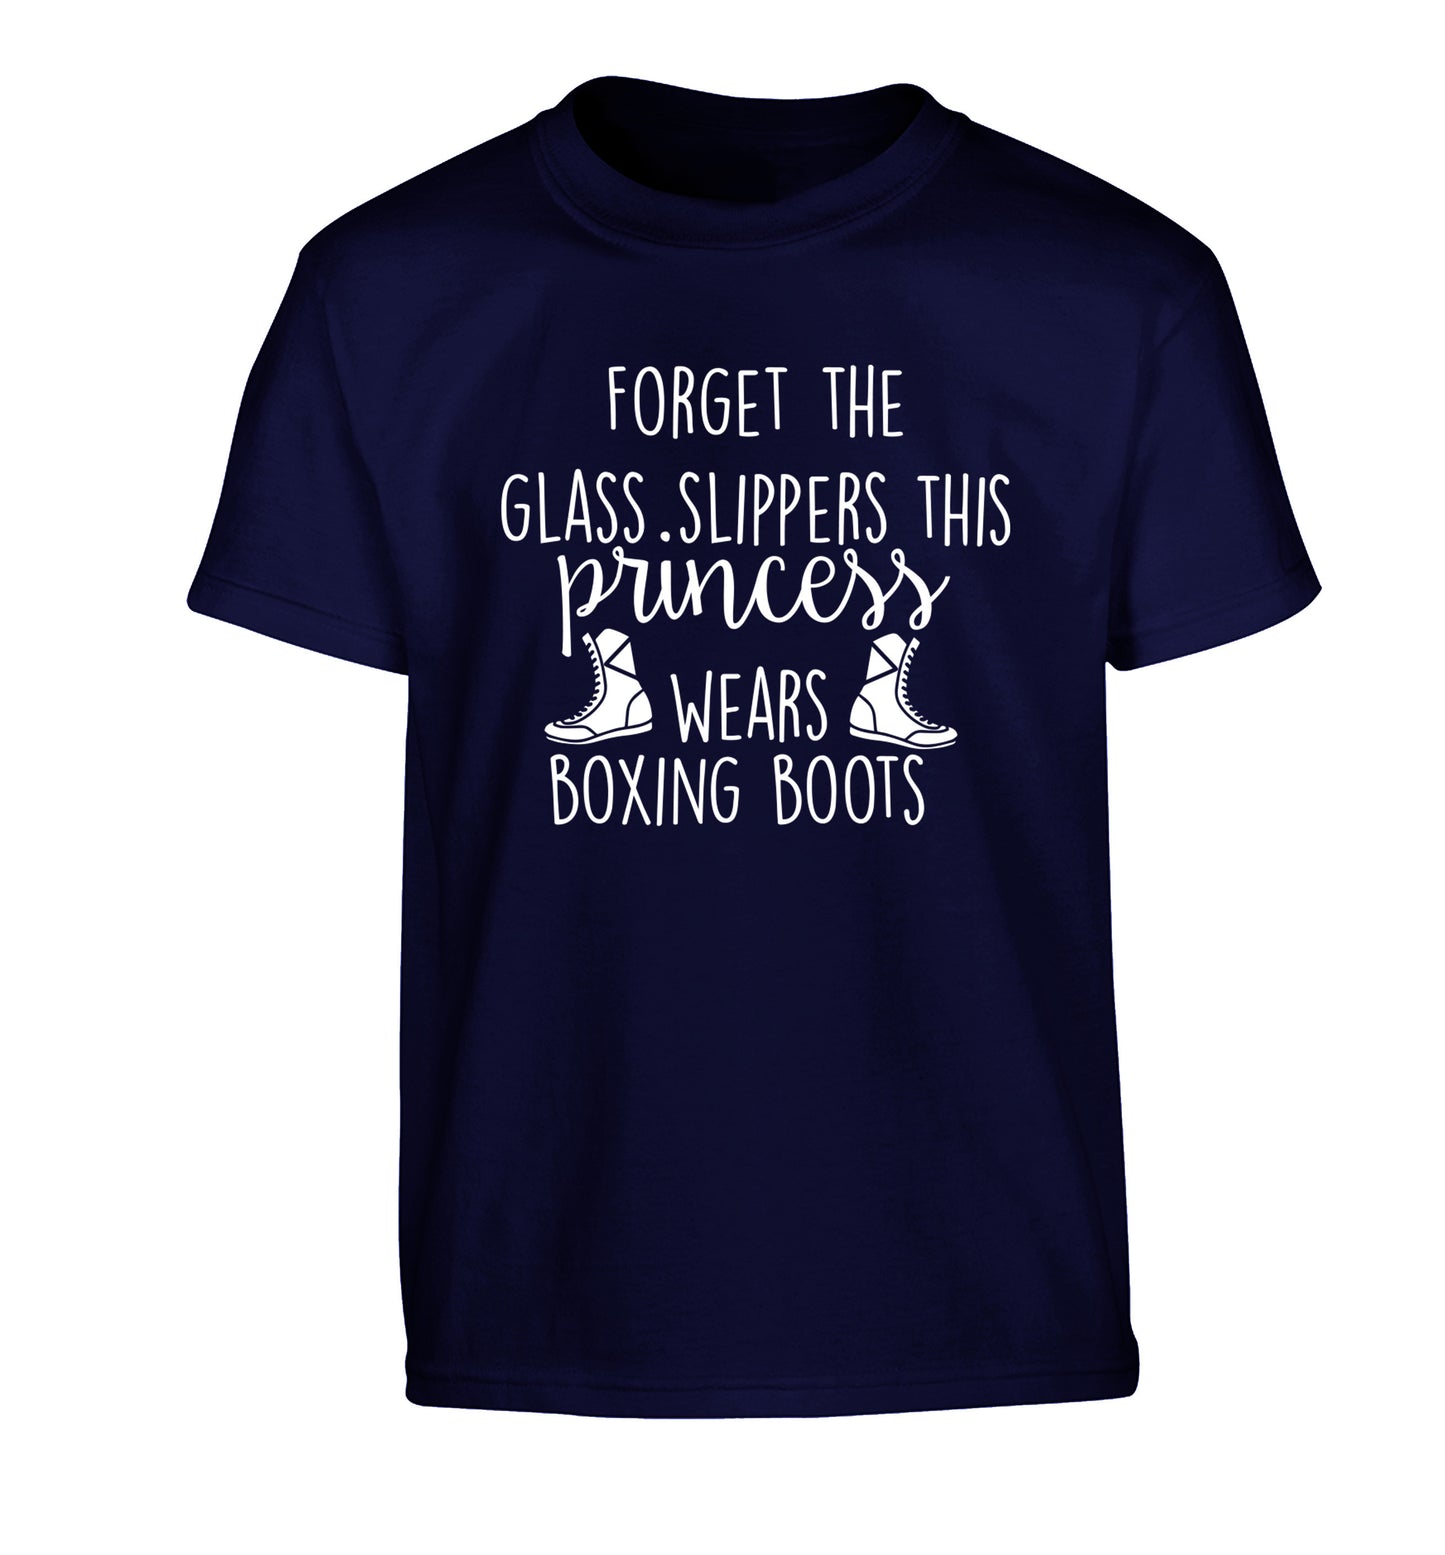 Forget the glass slippers this princess wears boxing boots Children's navy Tshirt 12-14 Years